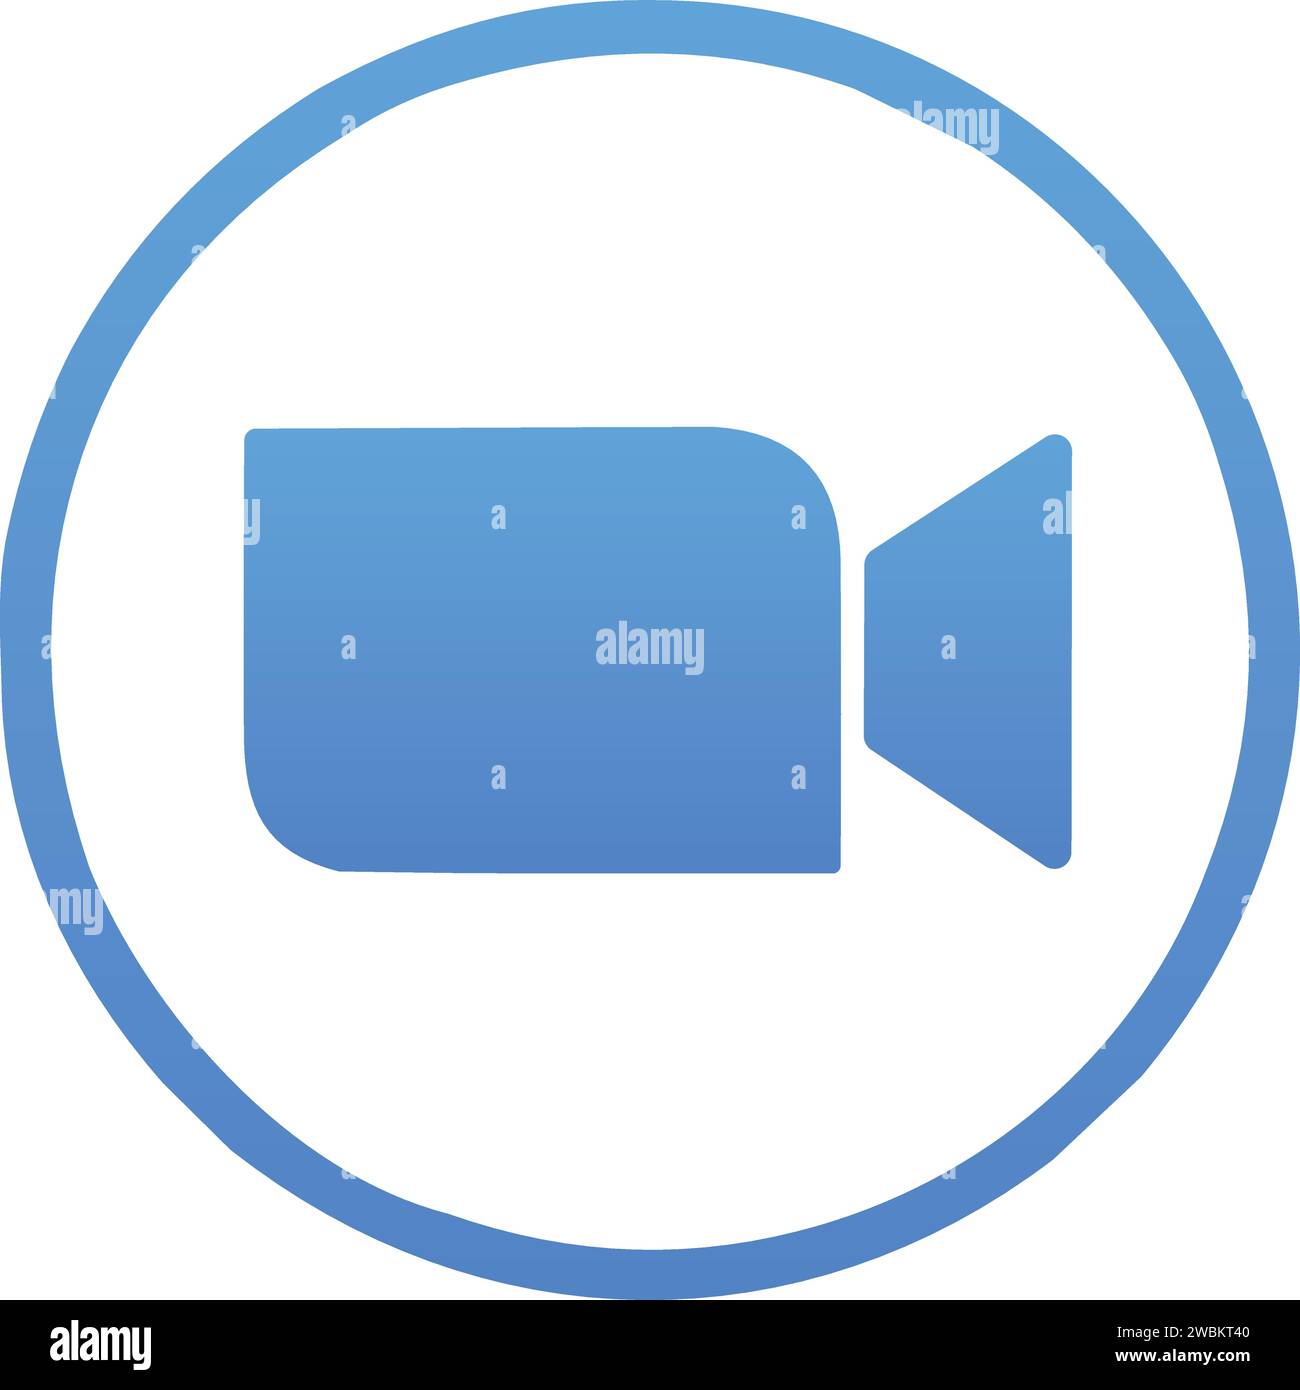 Zoom app logo. Application for video communications with cloud platform for video and audio conferencing, chat, and webinar. Blue Camera Icon. social Stock Vector